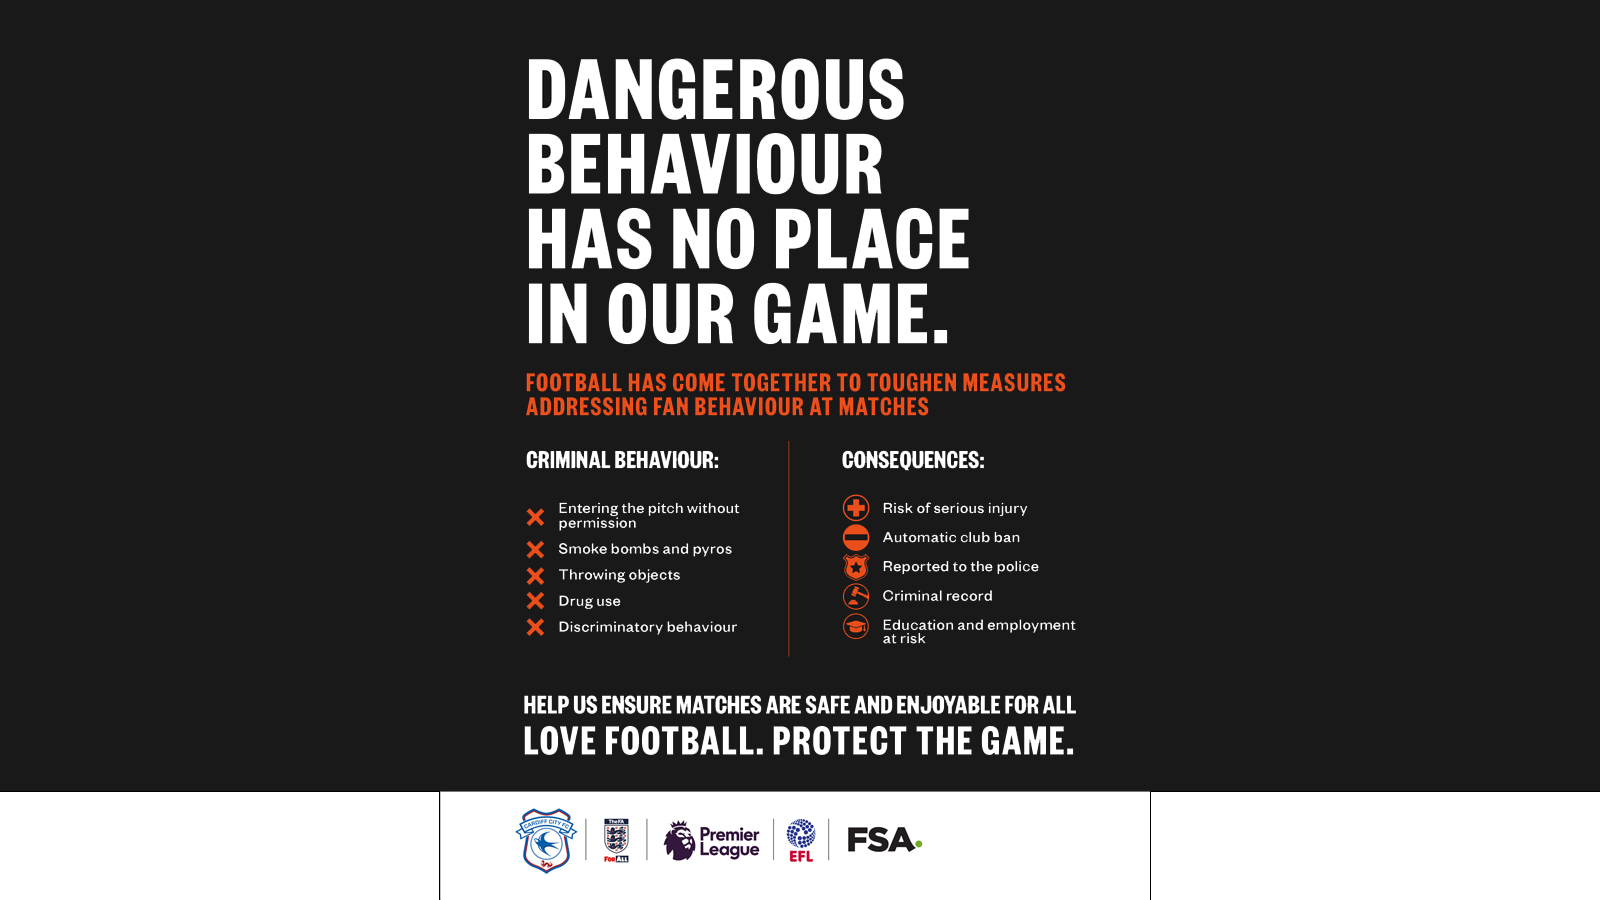 Love Football. Protect The Game.